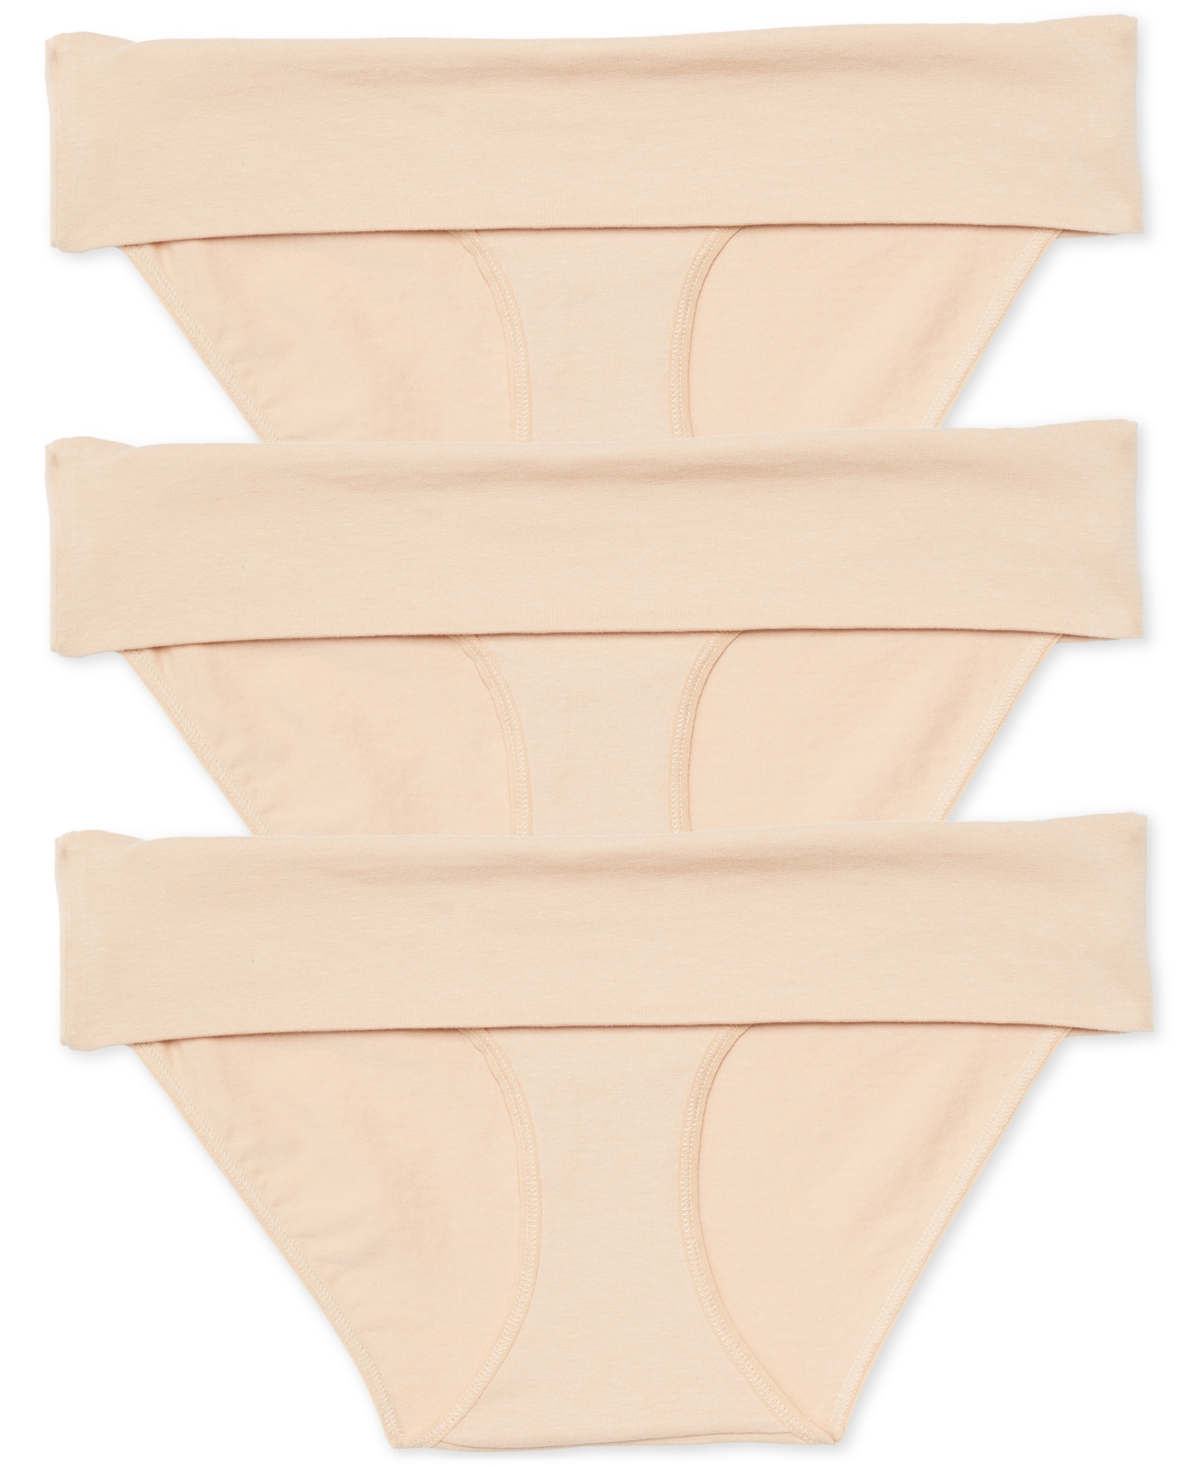 Maternity Over or Under the Bump Underwear Panties (3 Pack)